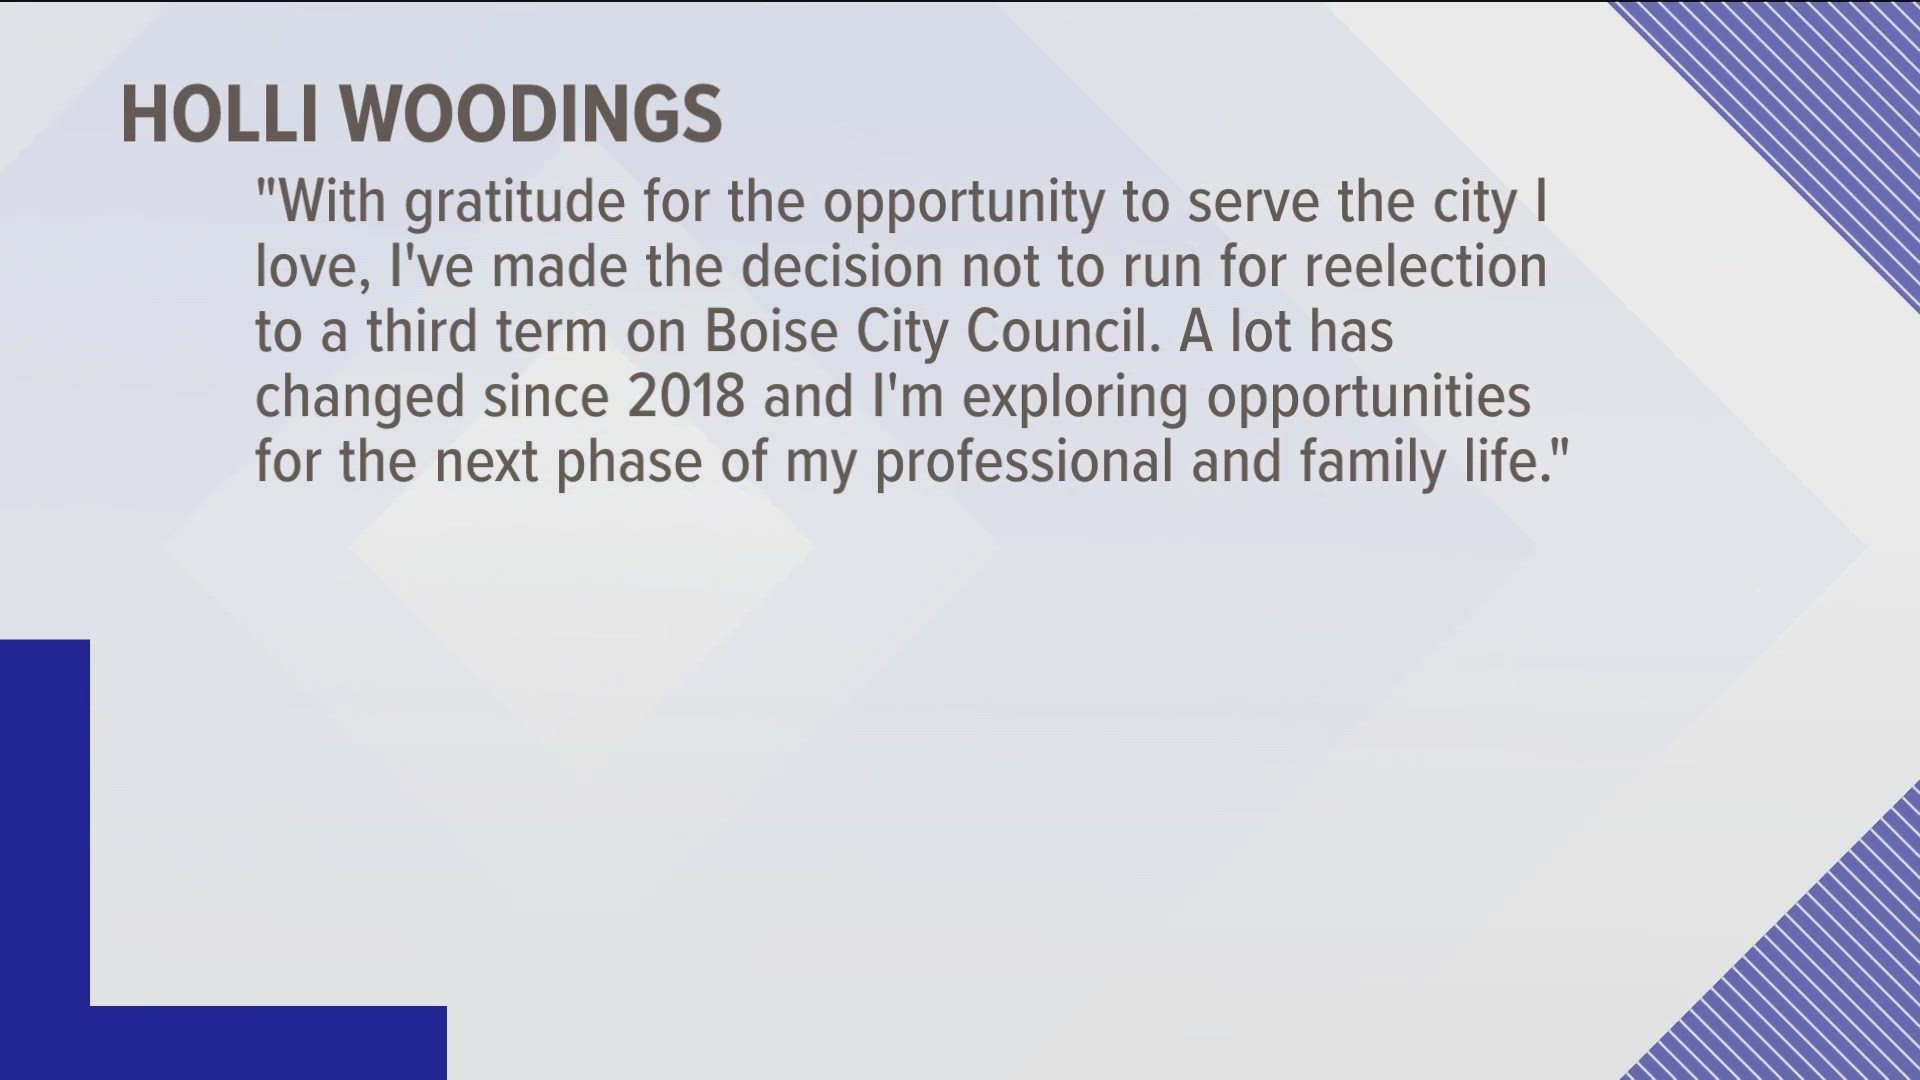 Woodings said she's "exploring opportunities" for the next phase in her life.